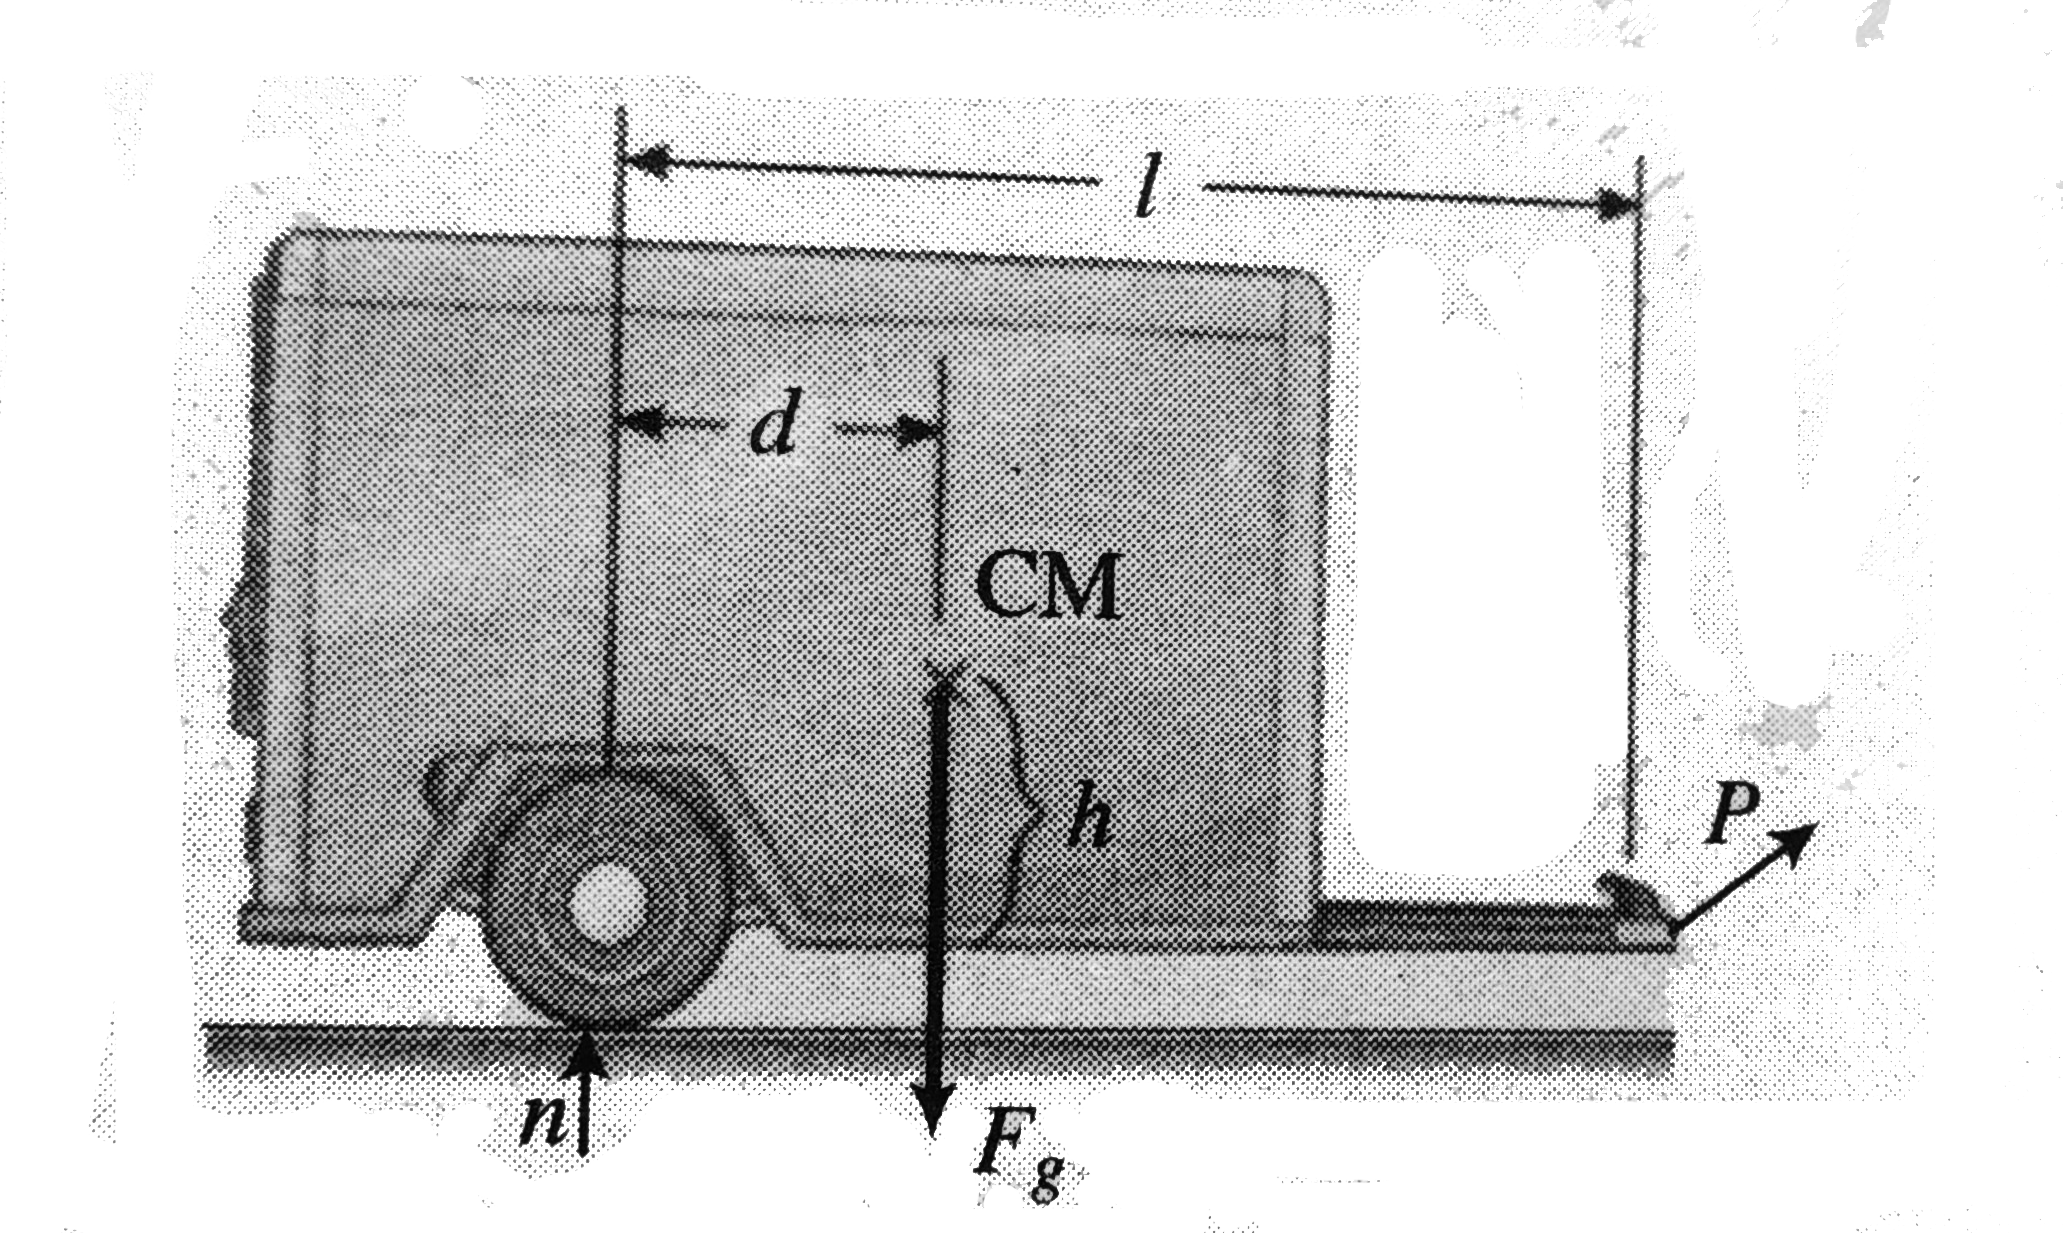 A trailer with loaded weightF(g) is being pulled by a vehicle with a force P, as in figure. The trailer is loaded such that its centre of mass is located as shown. Neglect the force of rolling friction and let a represent the x component of the acceleration of the trailer. (a) Find the vertical component of P in terms of the given parameters. (b) If a =2.00 ms^(-2) and h = 1.50 m, what must be the value of d in order that P = 0 (no vertical load on the vehicle)?